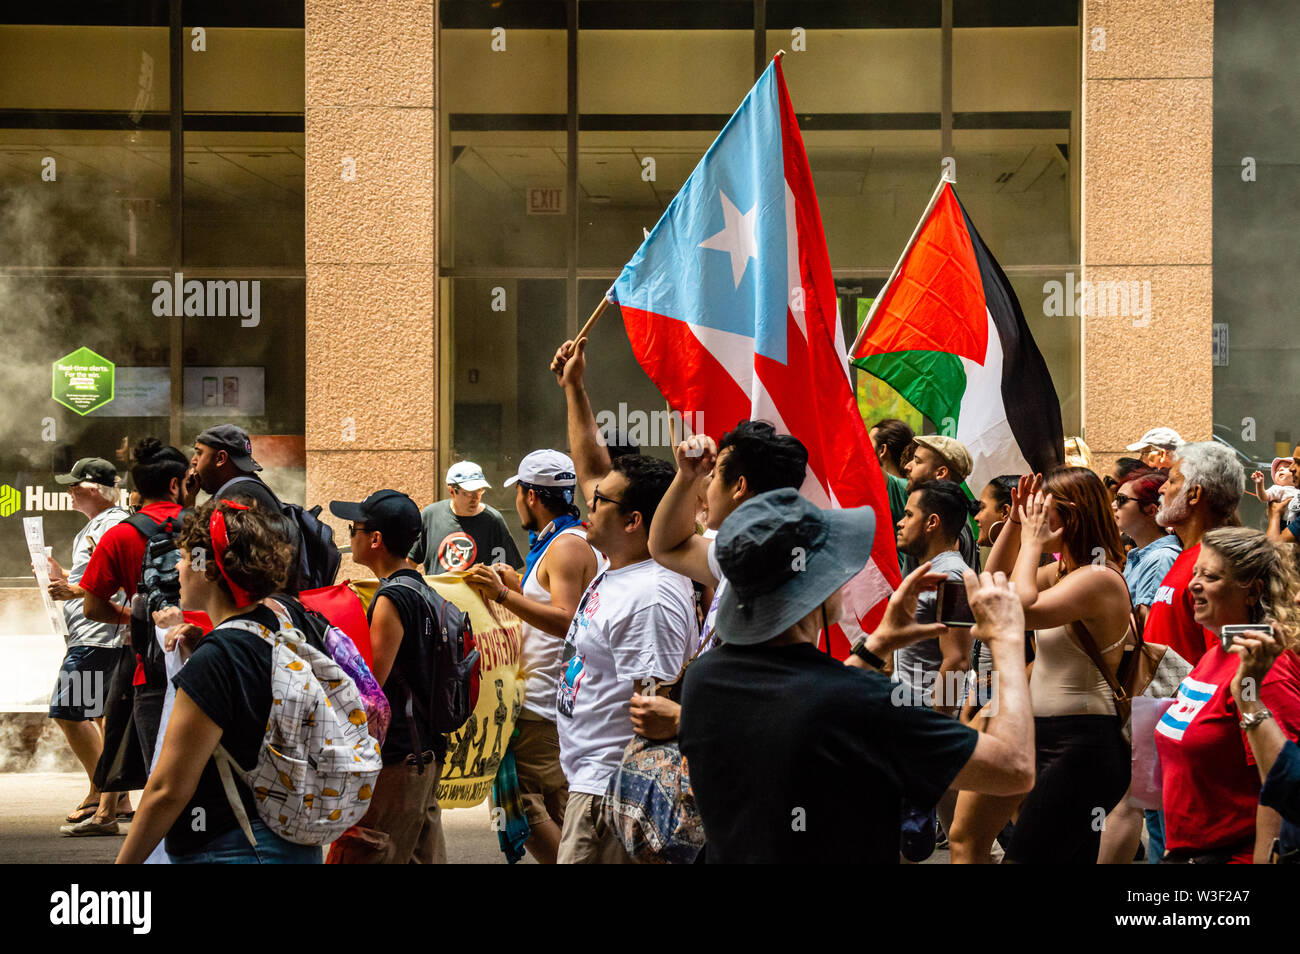 Downtown, Chicago-July 13, 2019: Protest against Immigration ICE and Border Patrol. Stock Photo